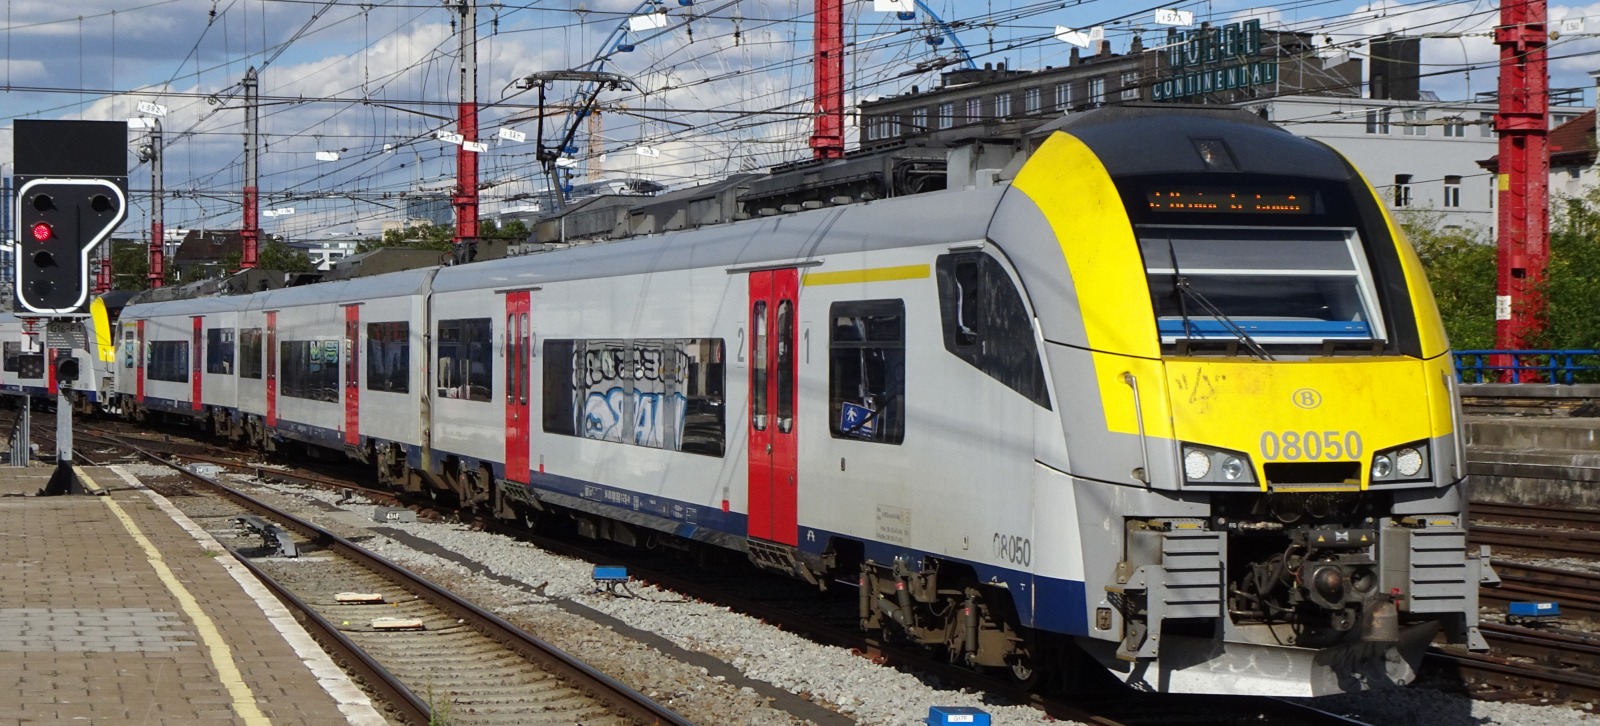 AM 08 050 in August 2018 entering Brussels Midi train station